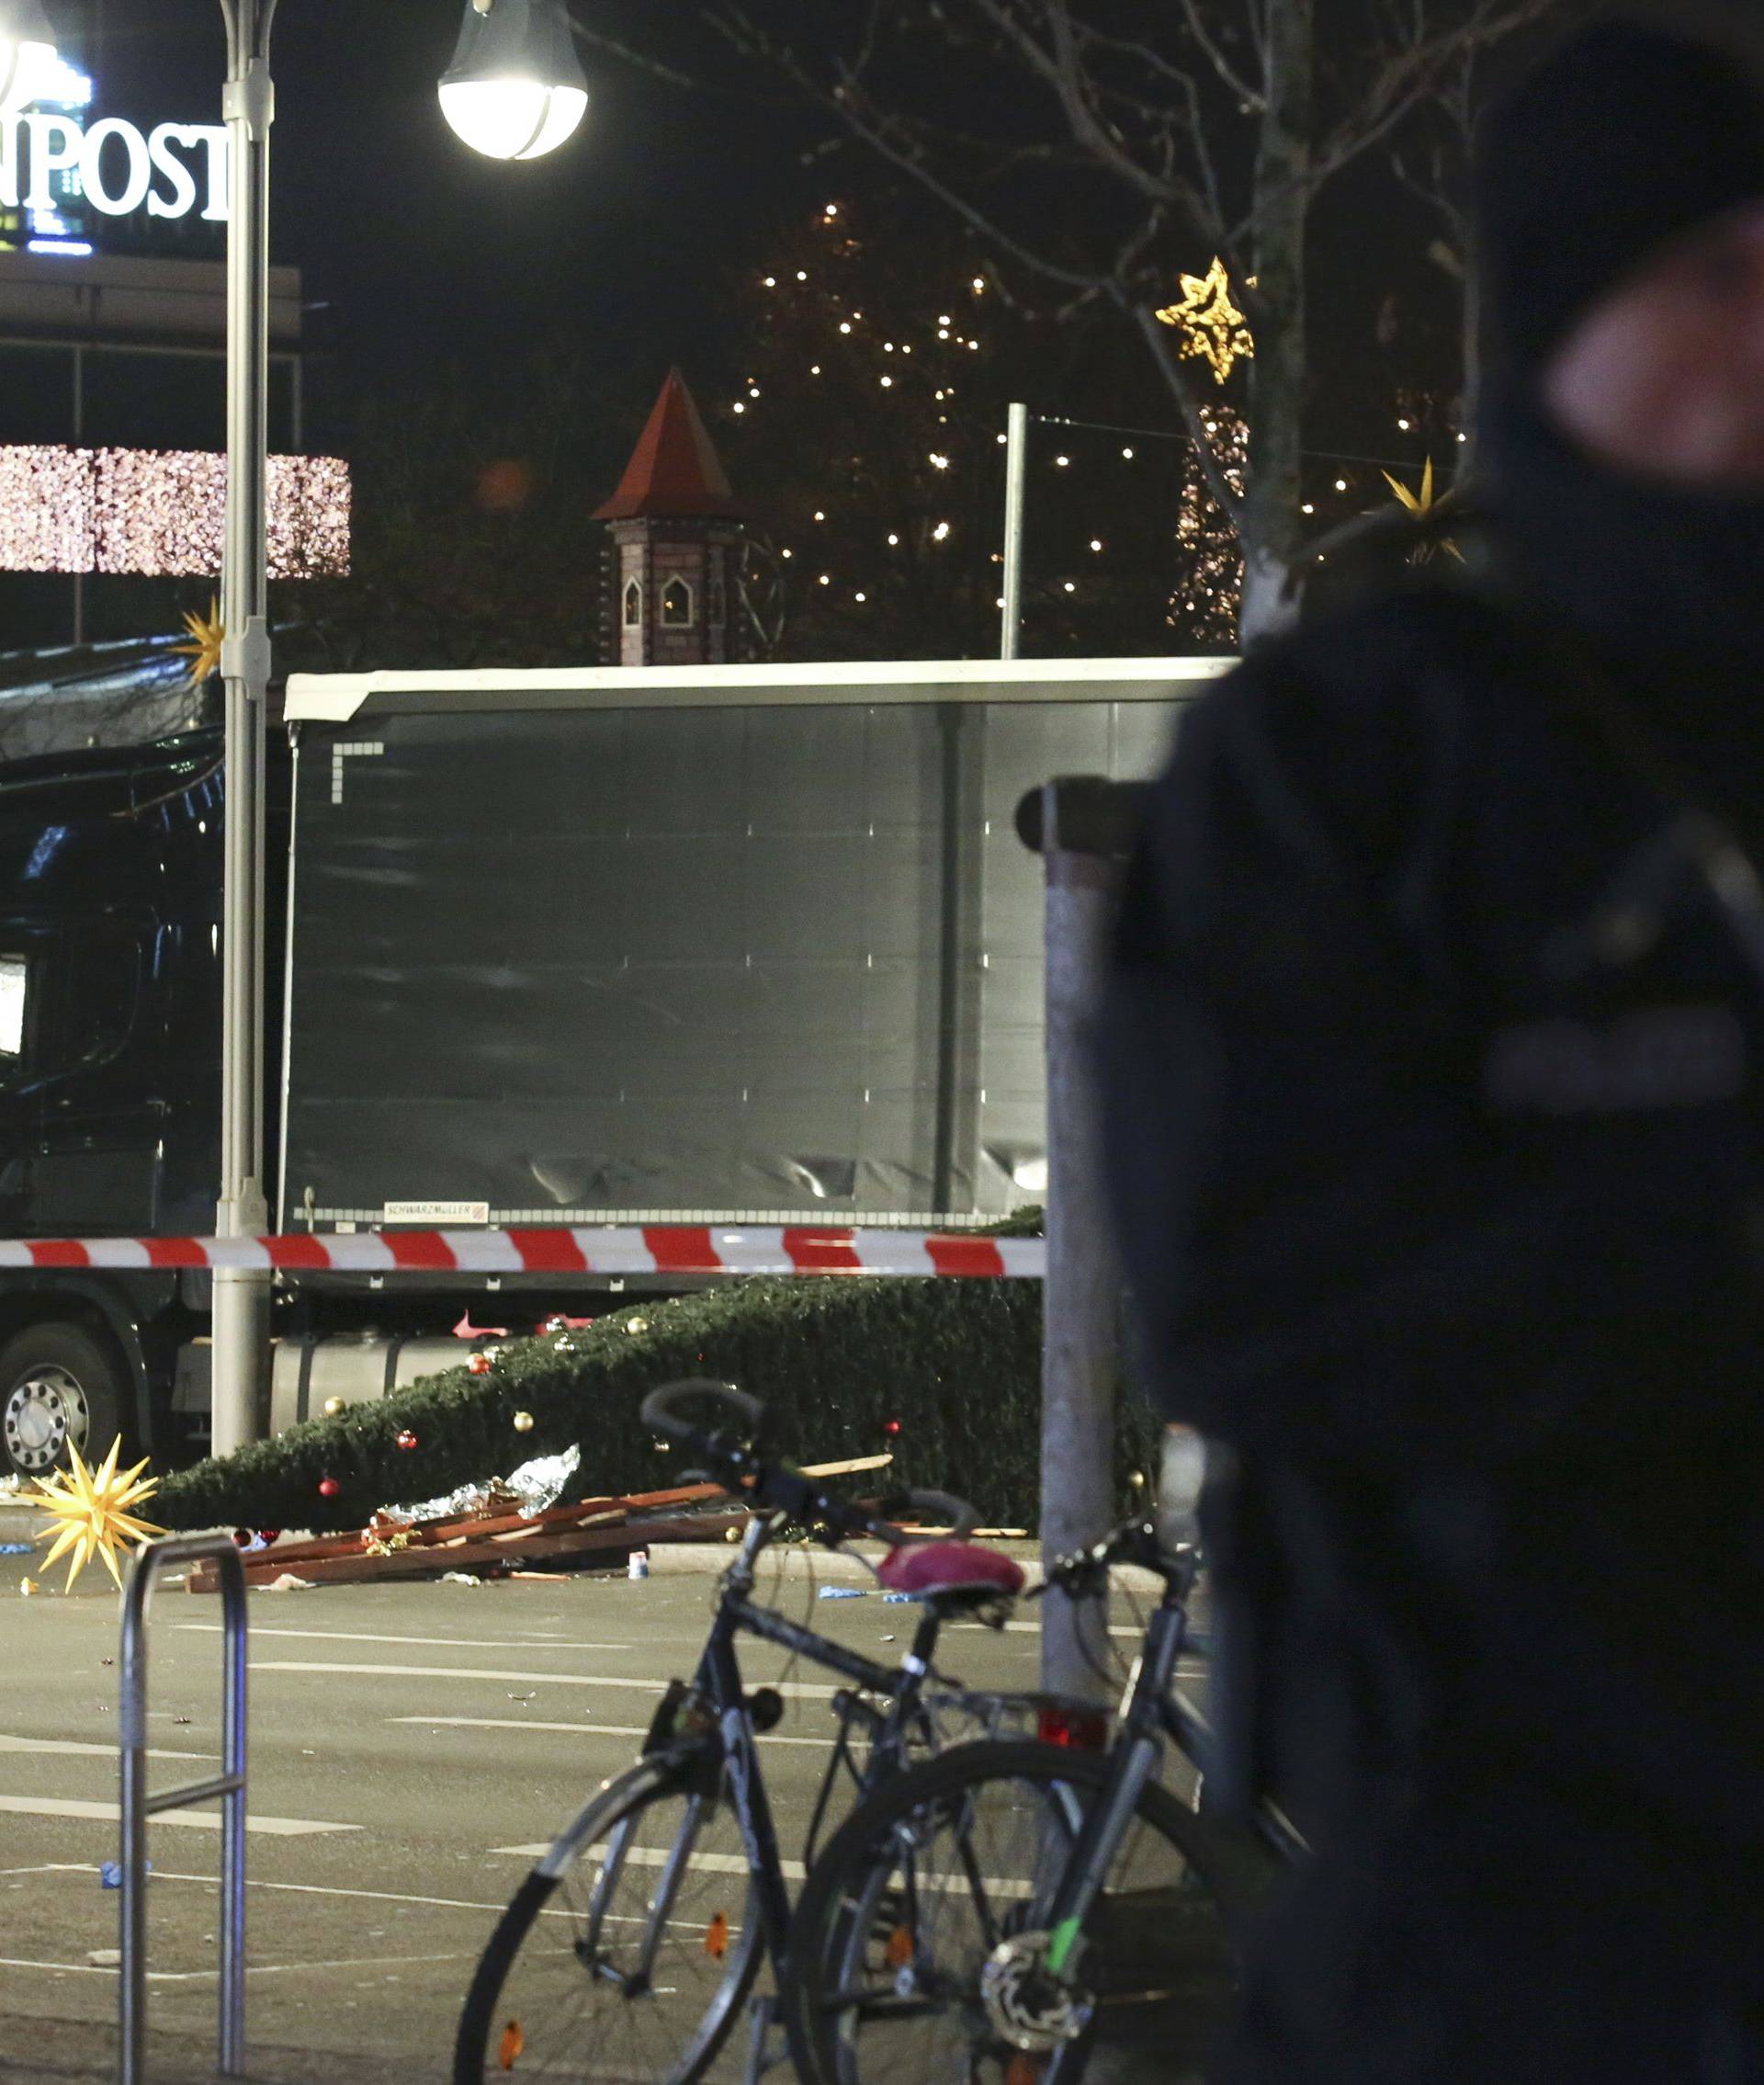 A German police officer guards a truck at a Berlin Christmas market following an accident